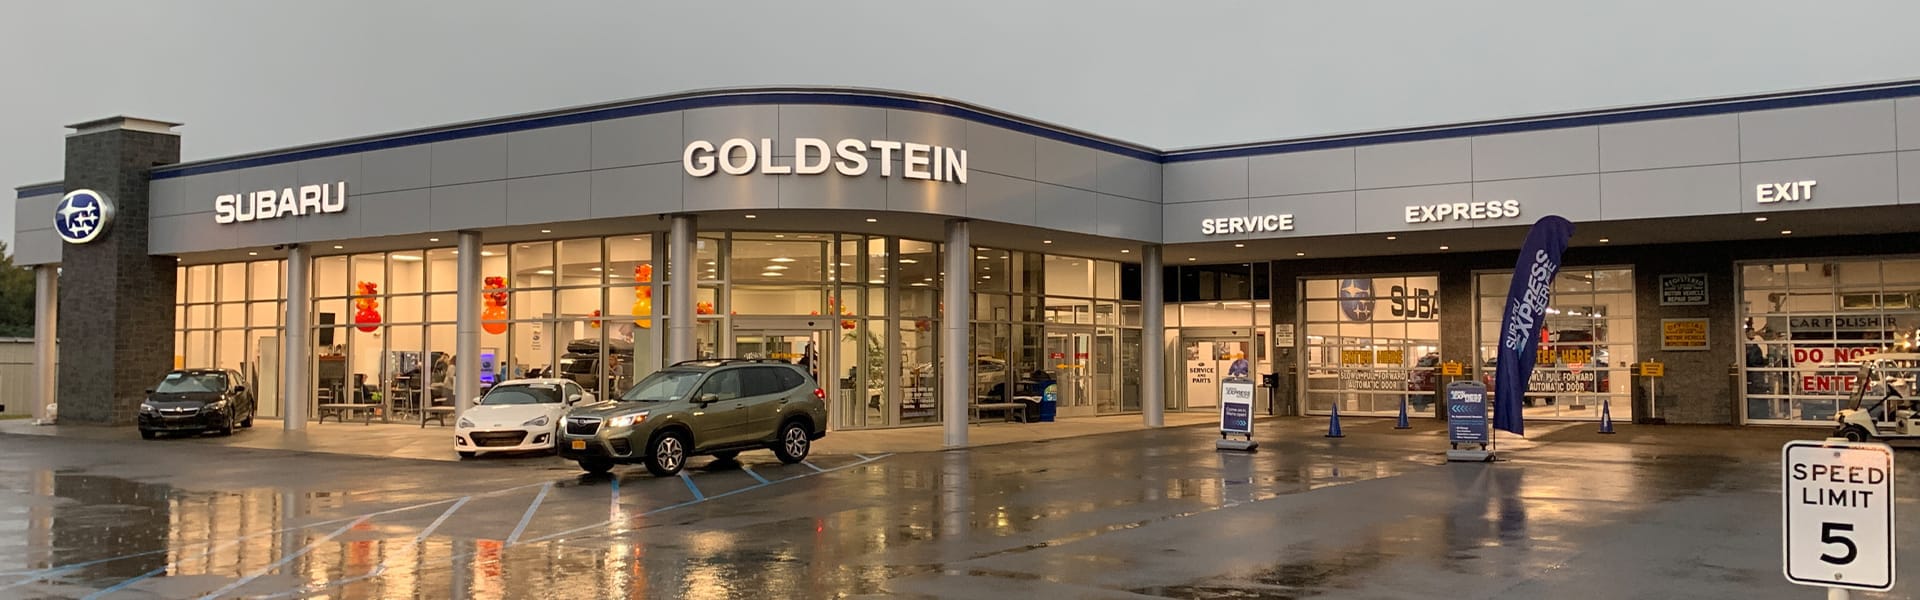 Store front of Goldstein Subaru in Albany, NY